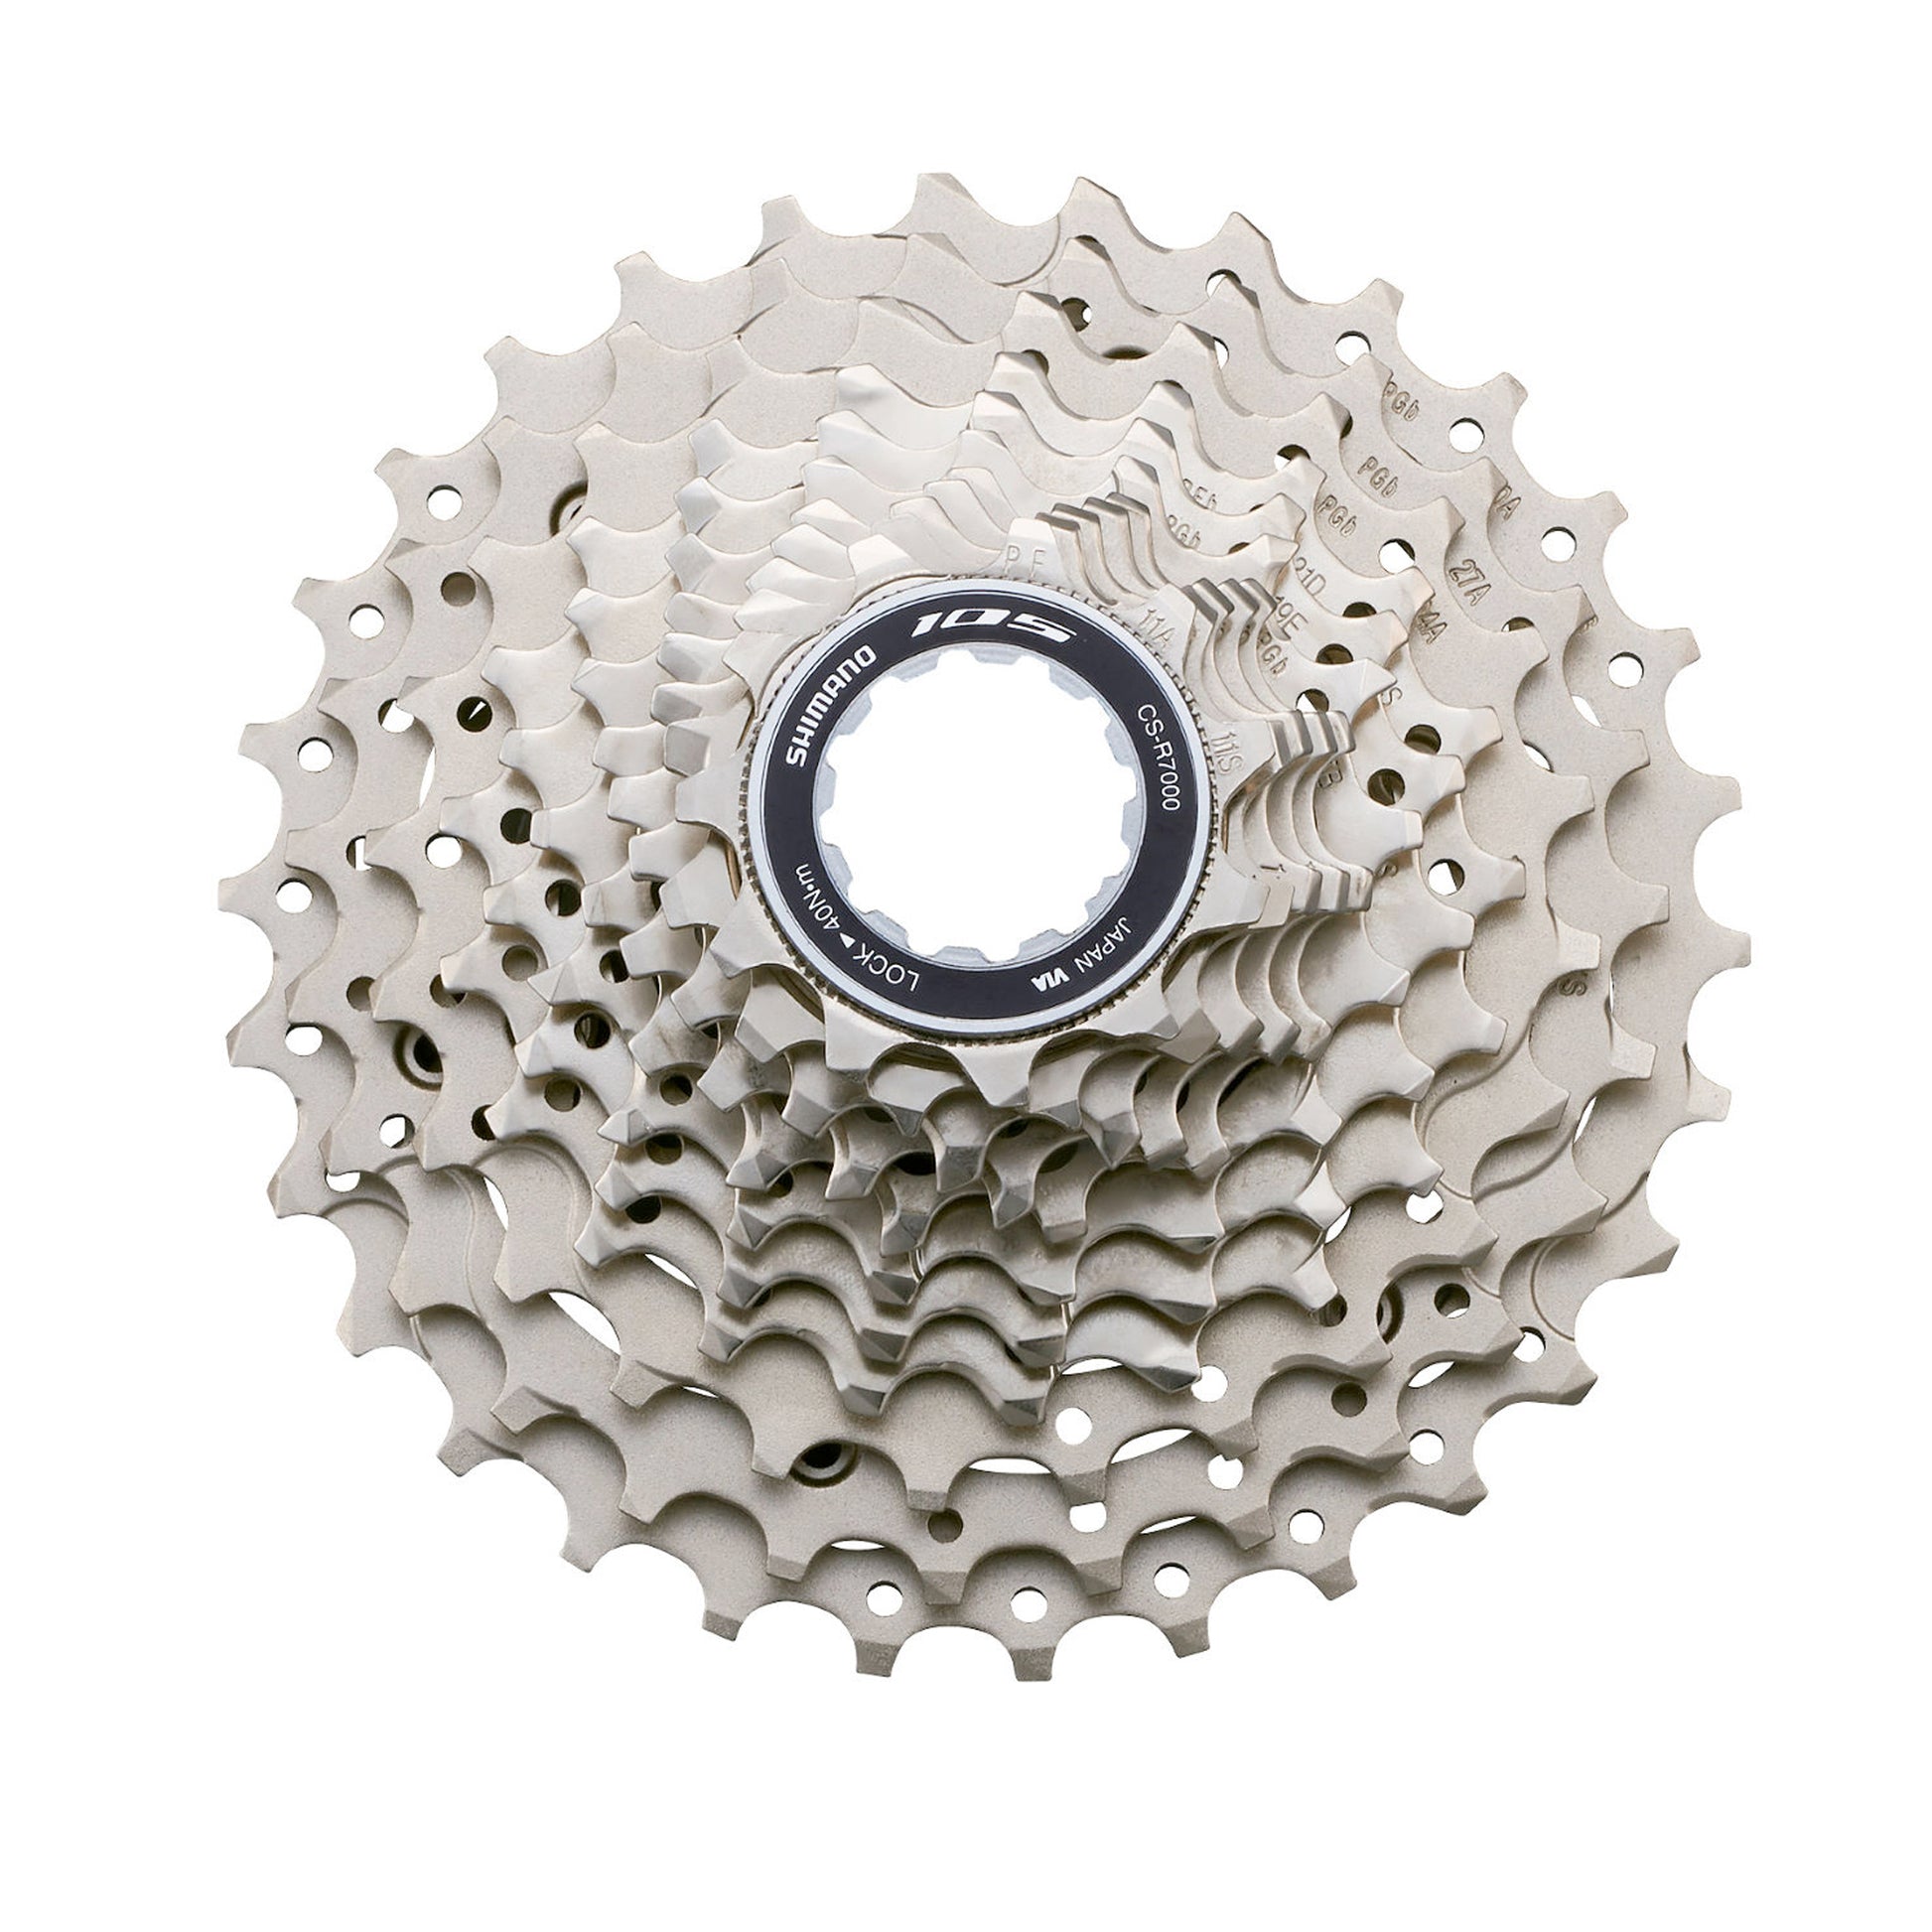 Shimano CS-R7000 105 11 Speed Cassette 11-30T buy at Woolys Wheels bike shop Sydney with free delivery